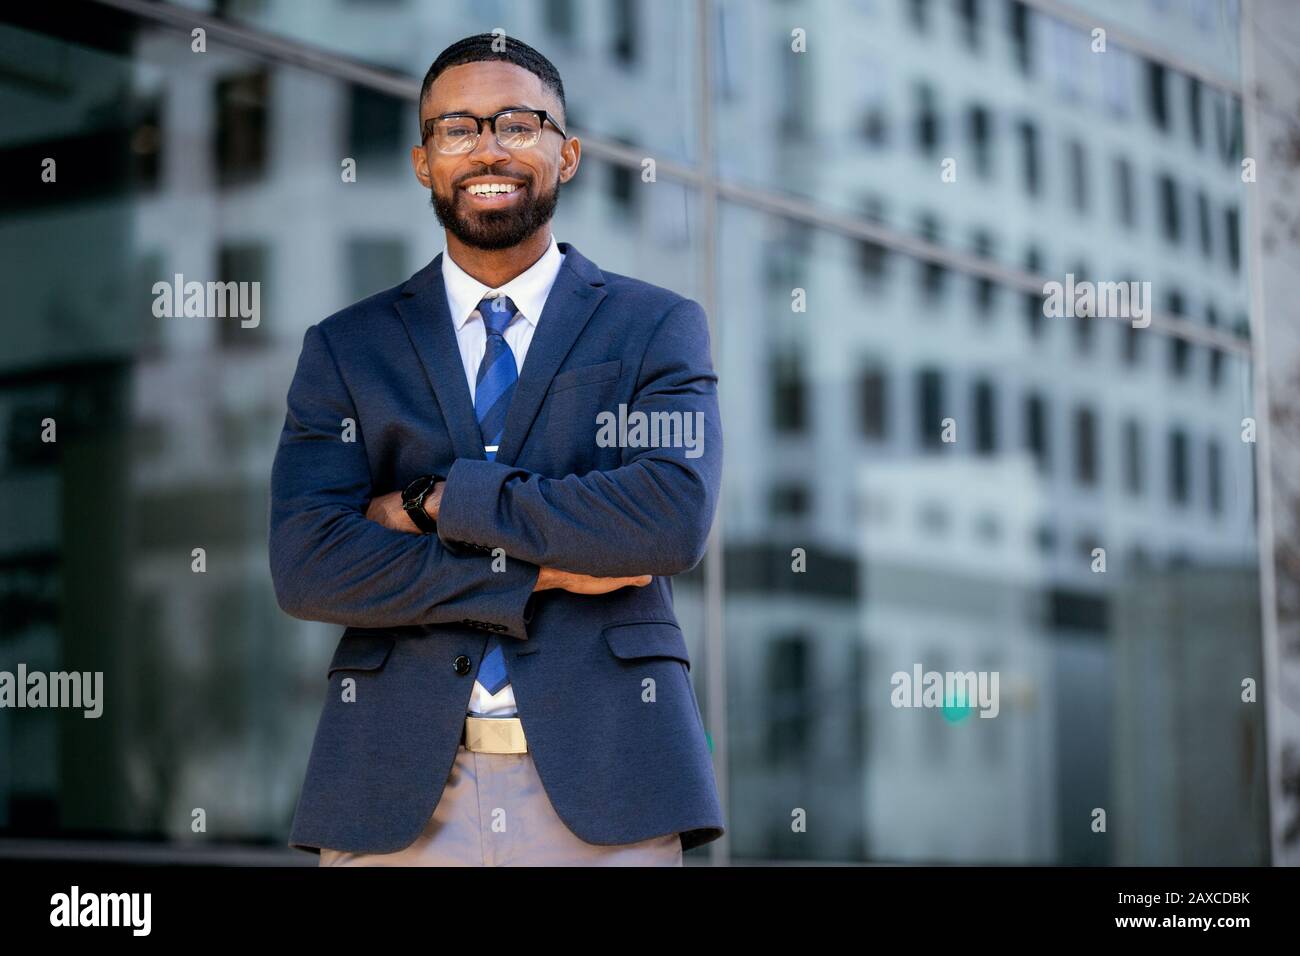 Commercial male model business executive, modern entrepreneur, CEO, company owner and founder, smiling cheerful and successful Stock Photo